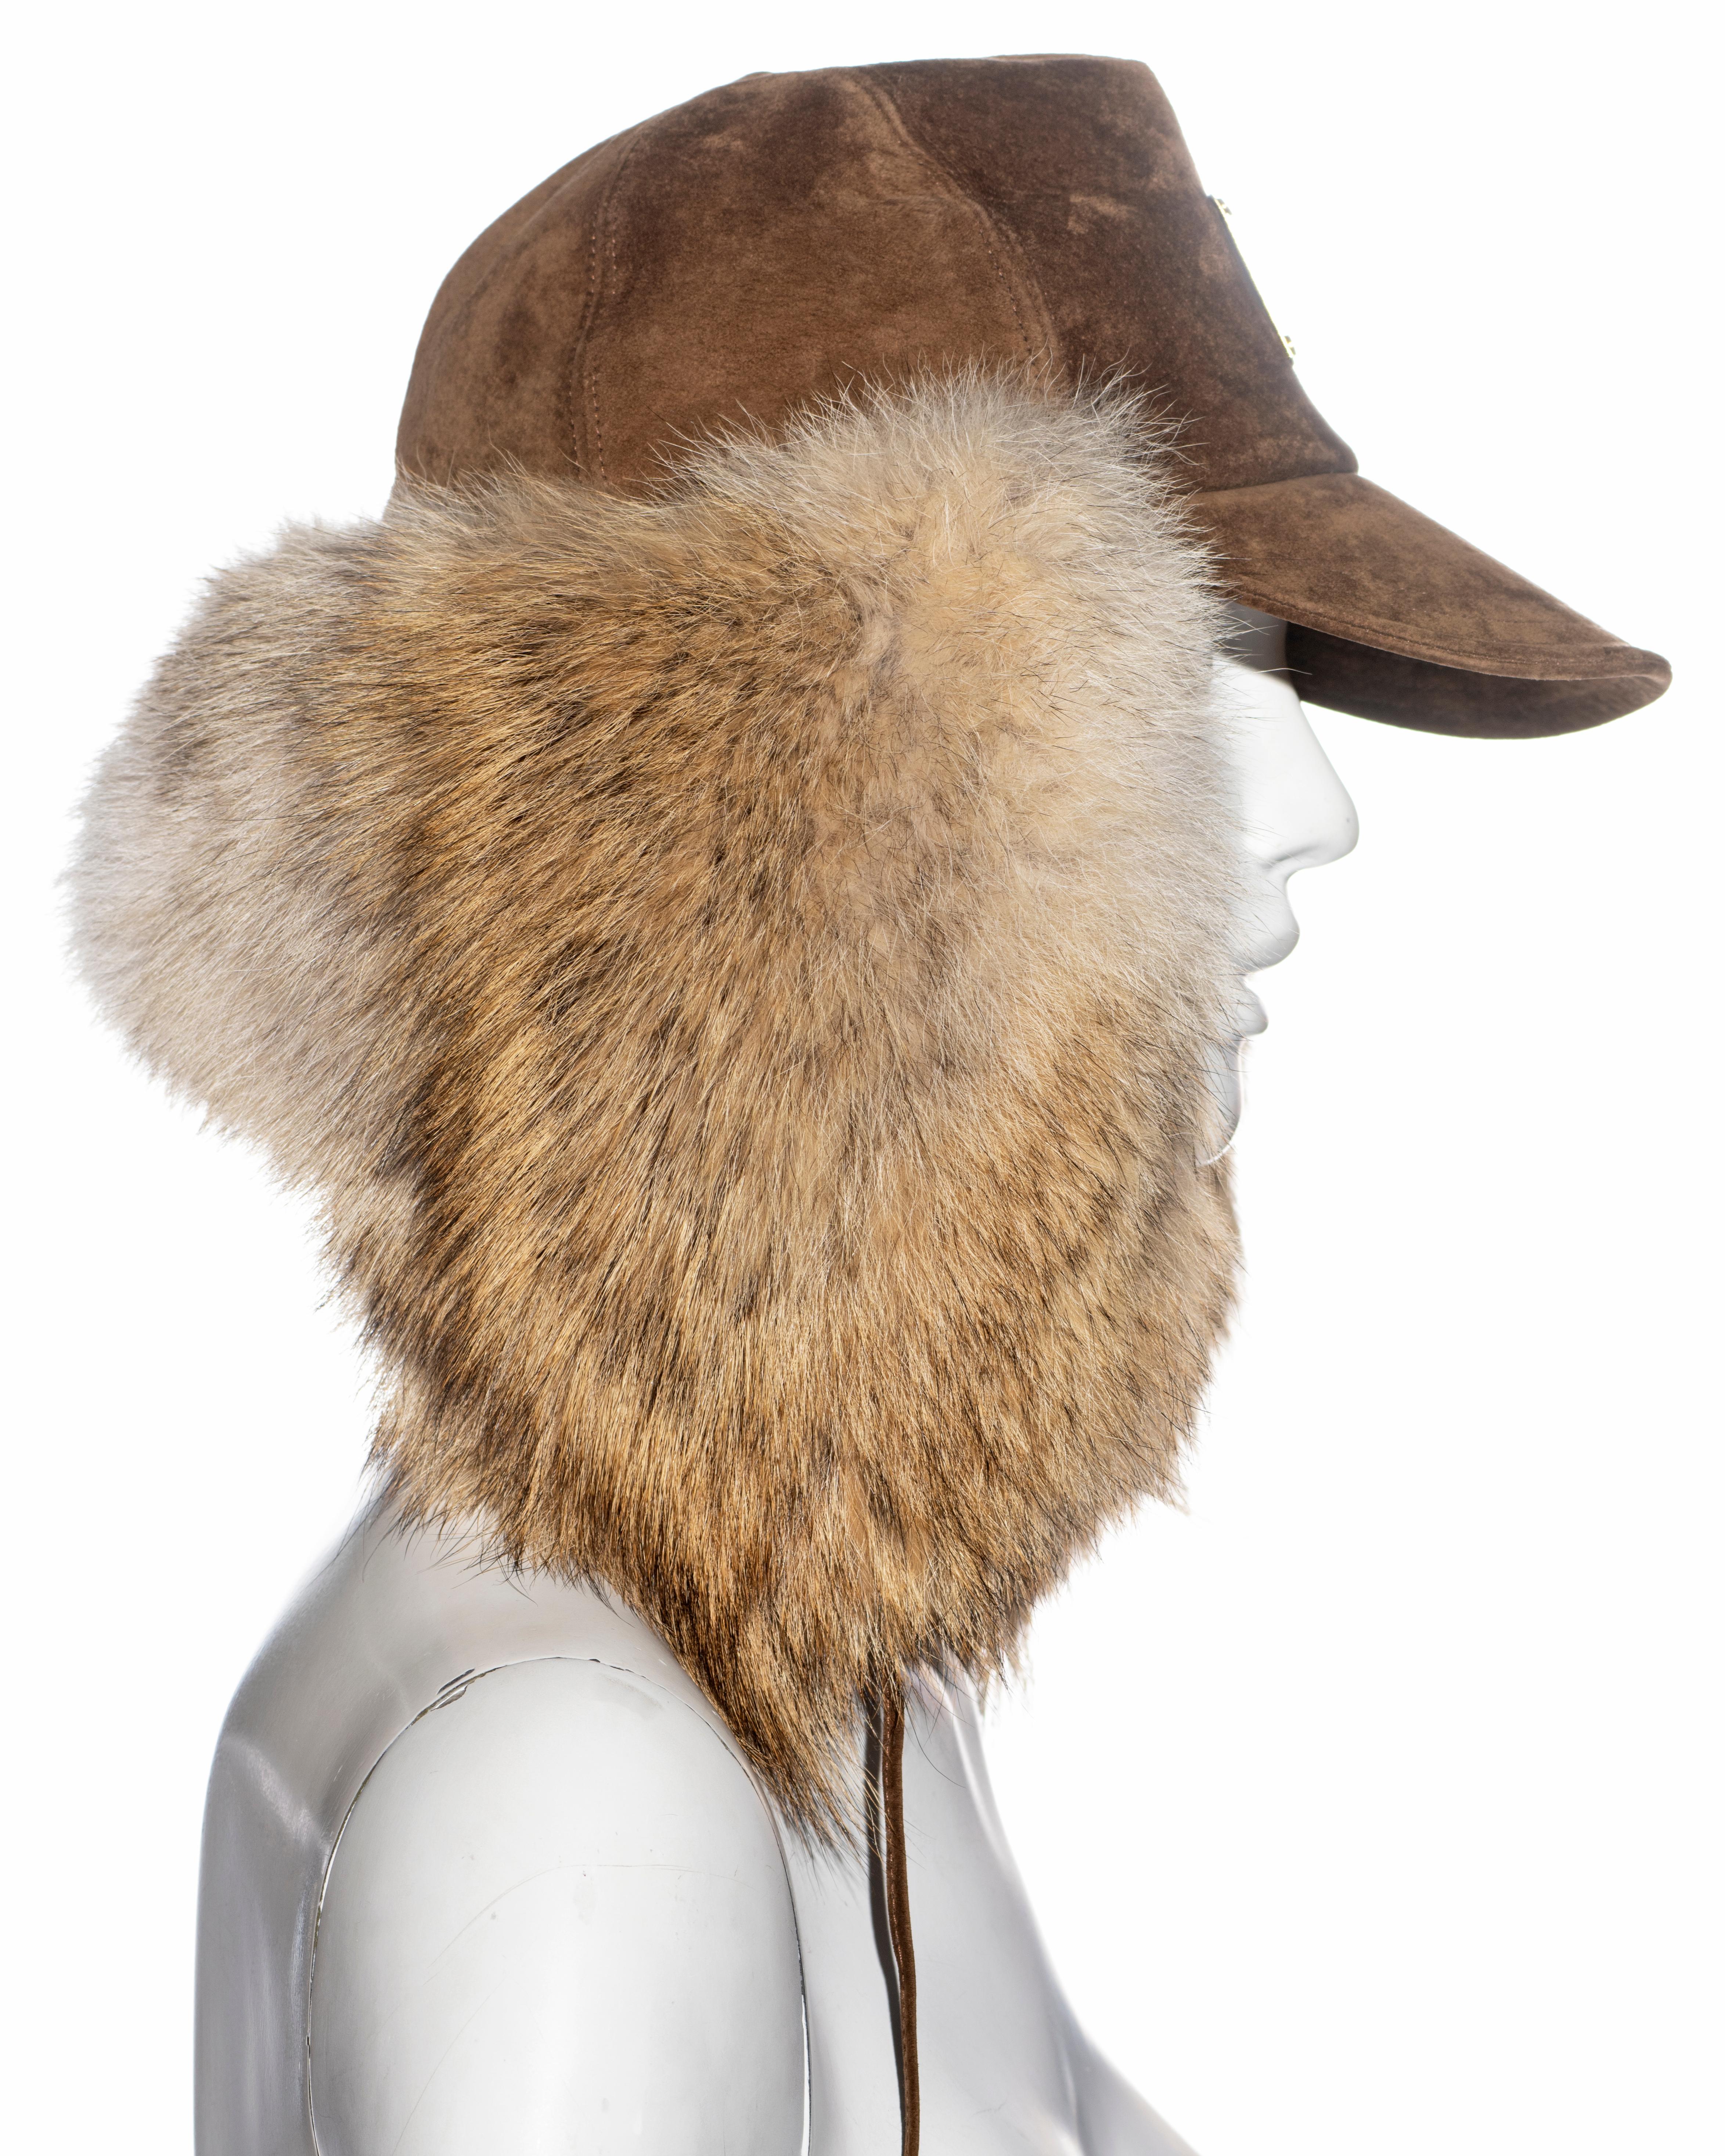 Women's Christian Dior by John Galliano brown leather and coyote fur hat, ss 2002